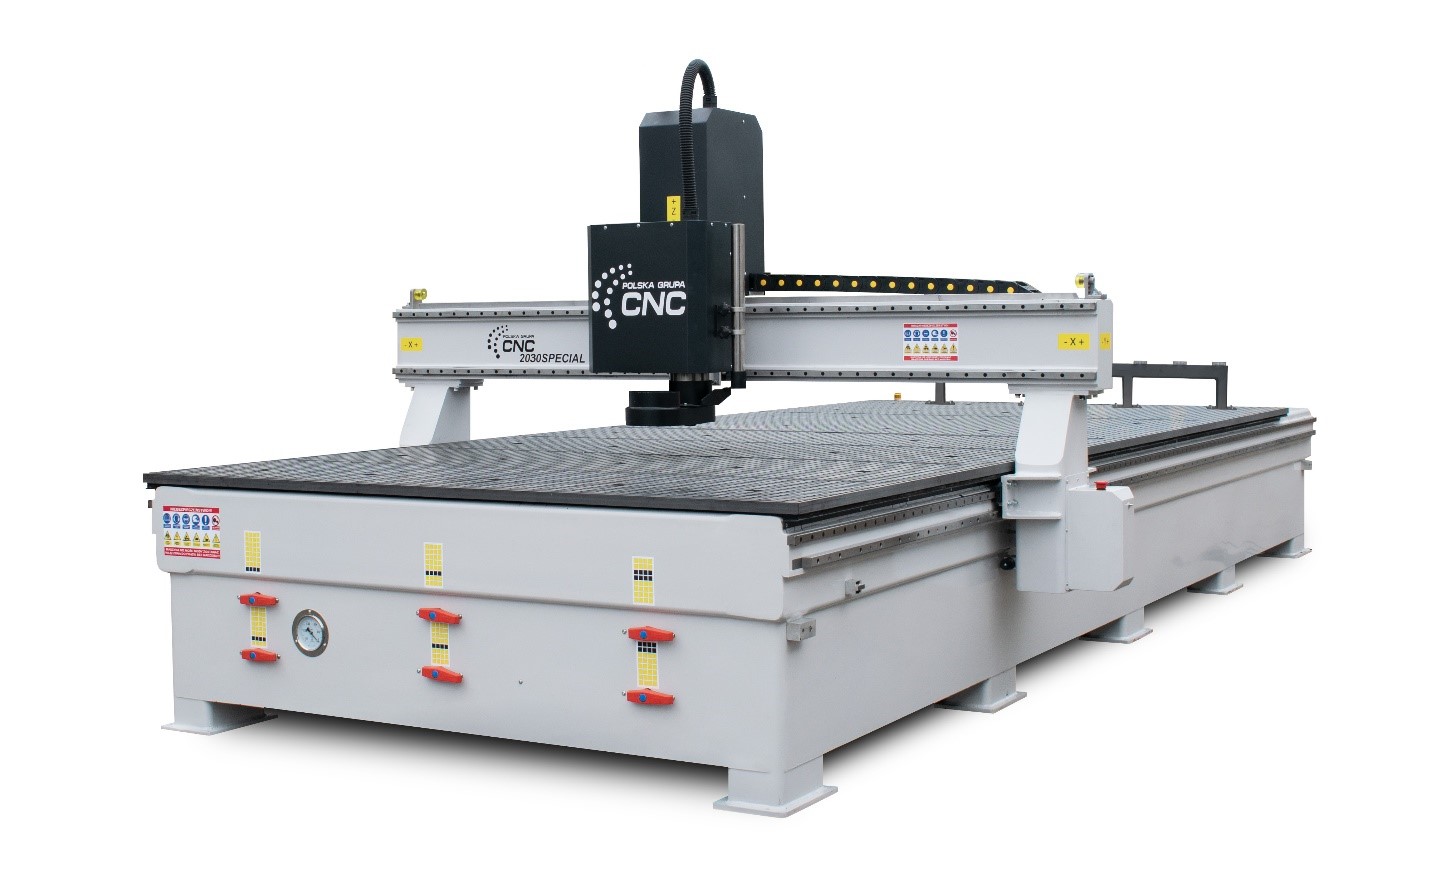 CNC router ATC 2030 Special